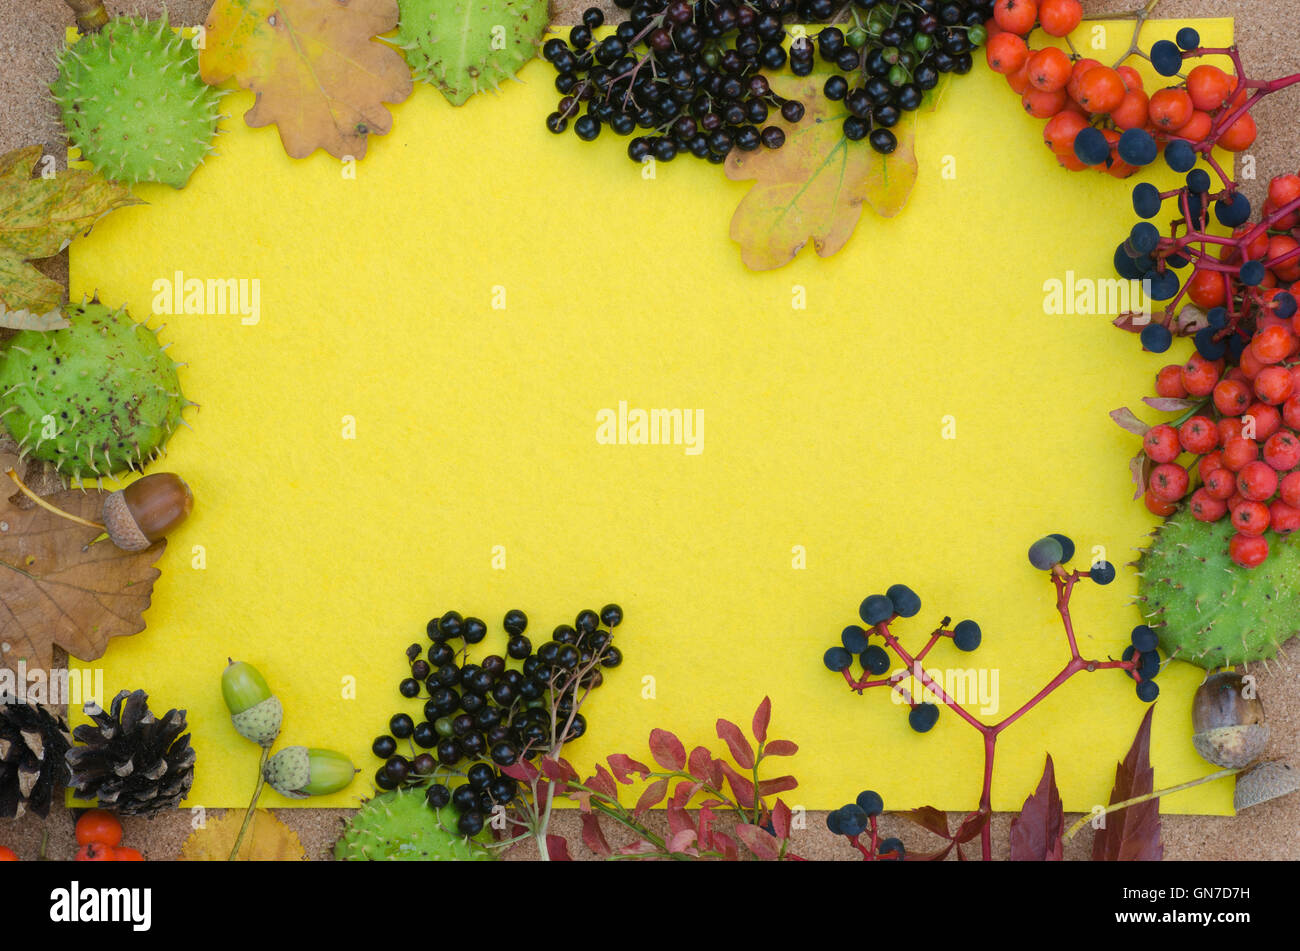 border made of multicolored fall plants Stock Photo